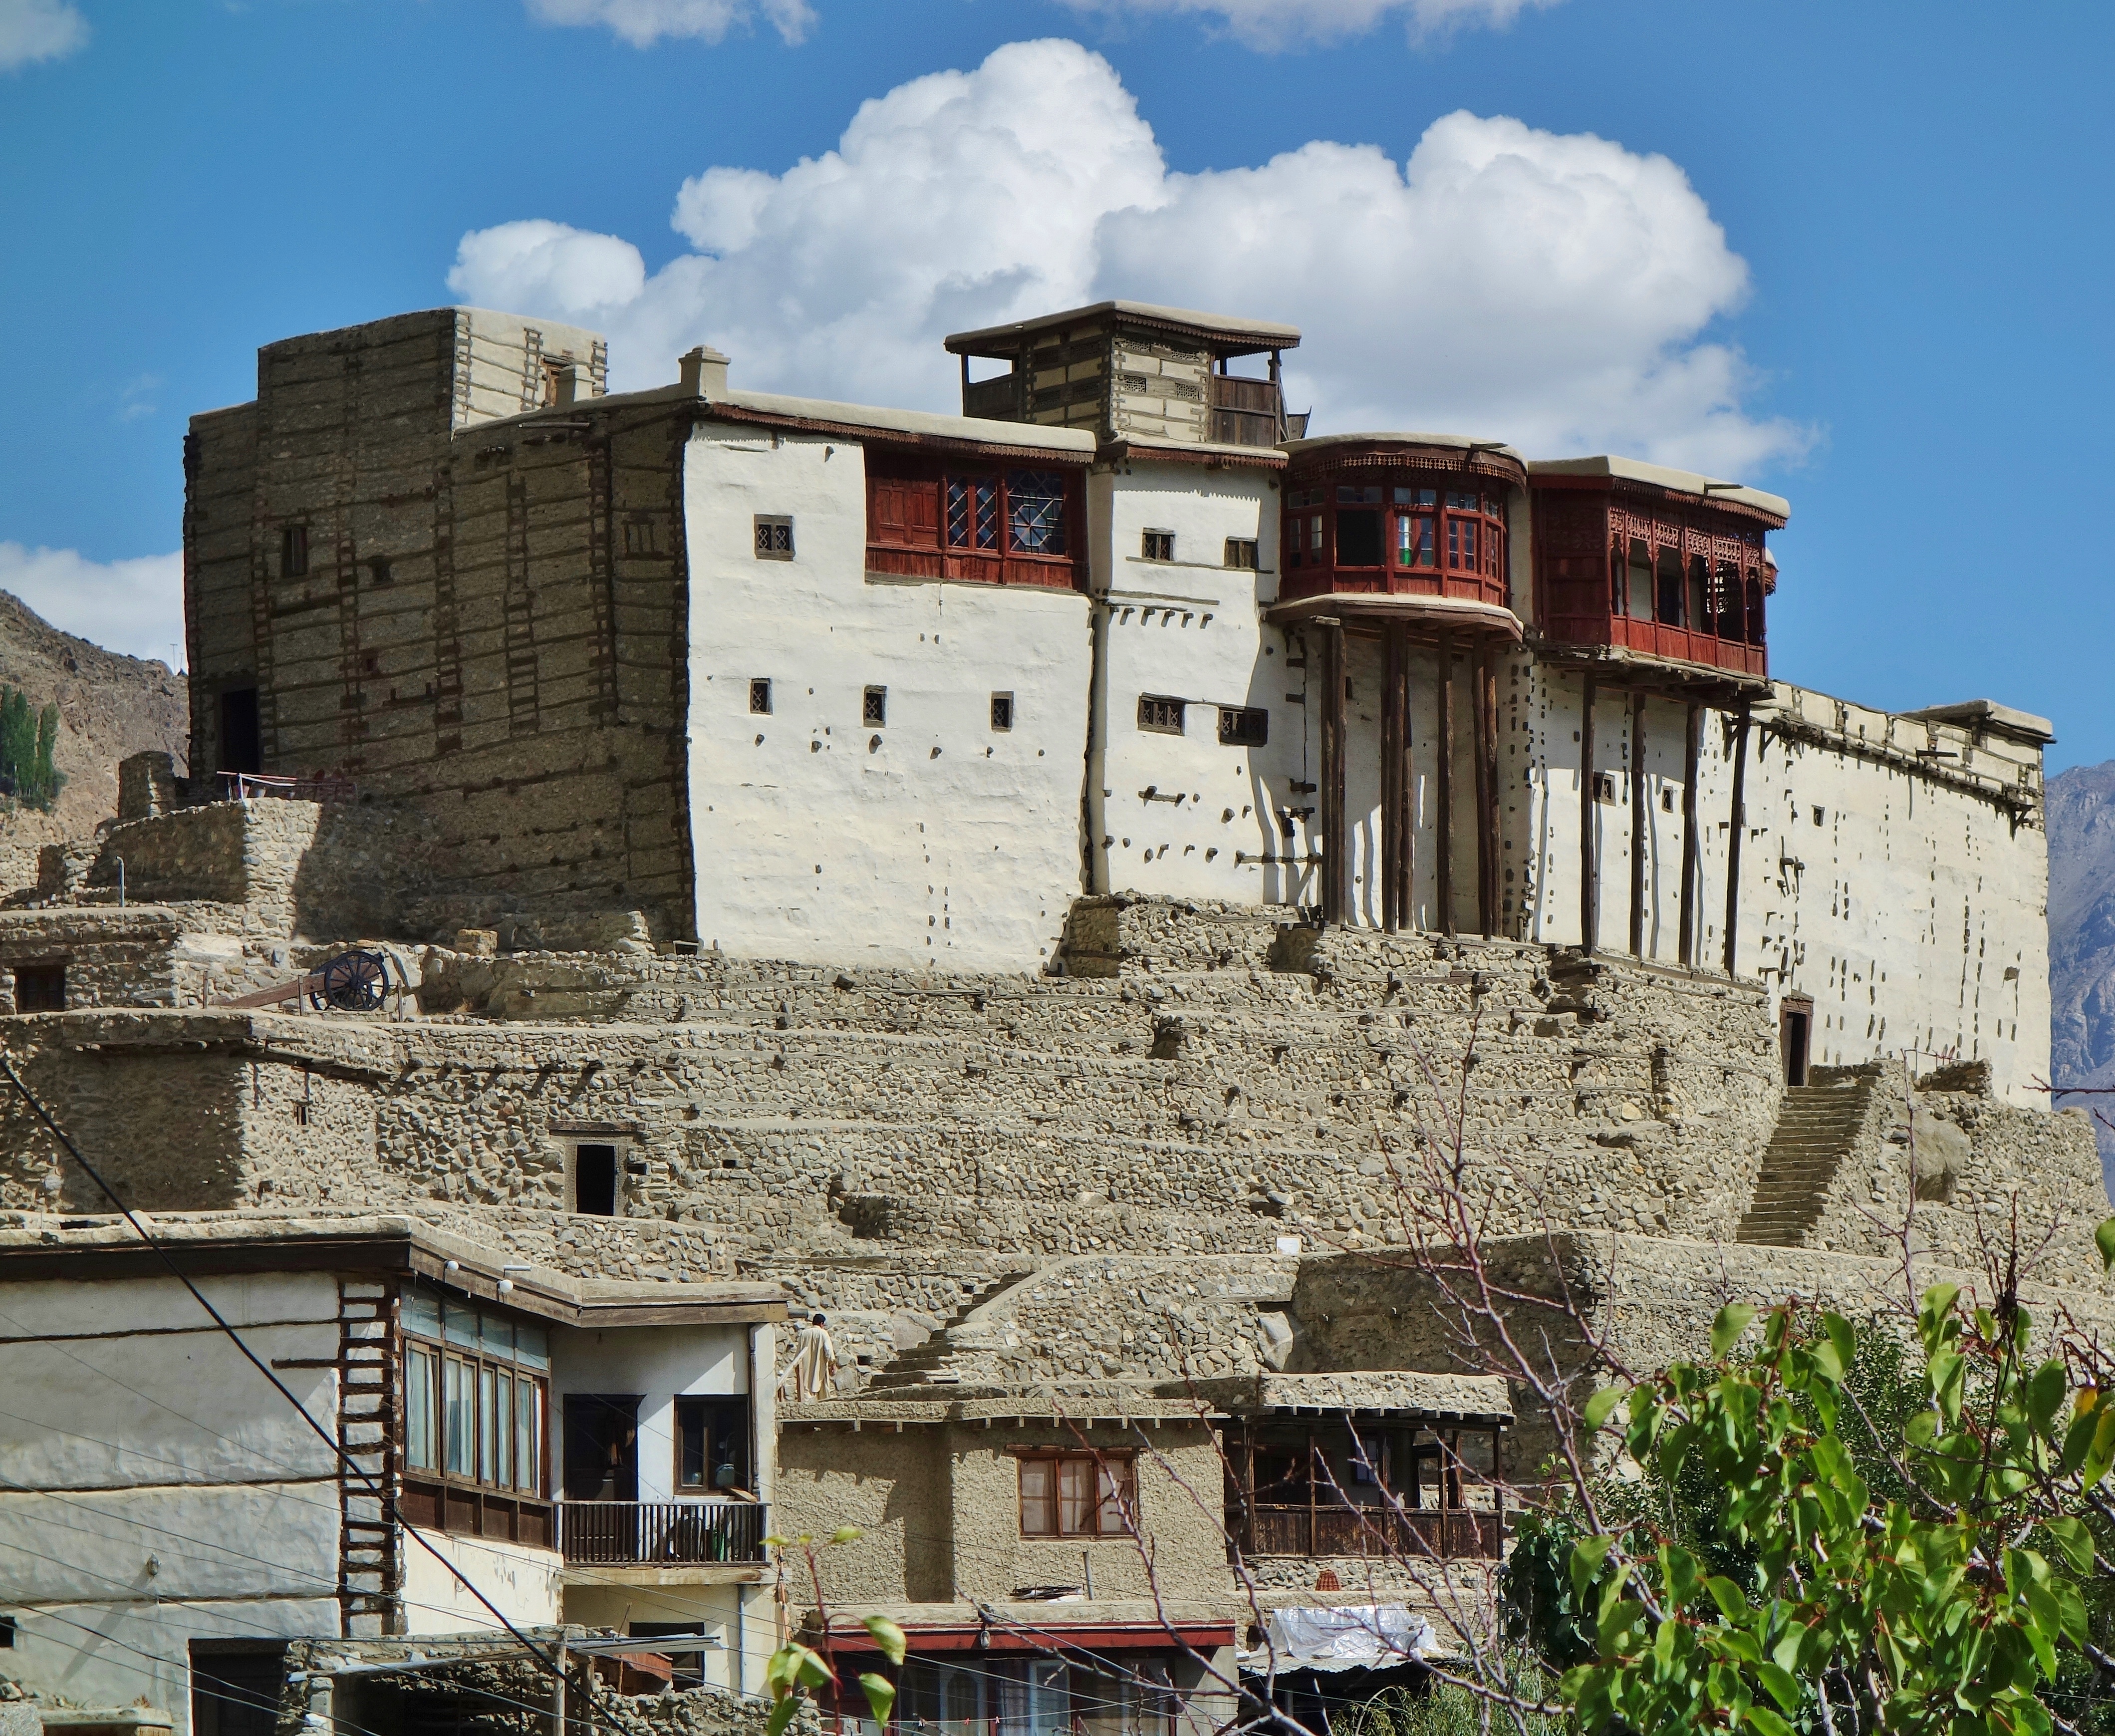 Having many dungeons and prisons, the fort was once a symbol of oppression and terror for the dissident voices in Hunza. Now it stands as a representation of the region's collective past 